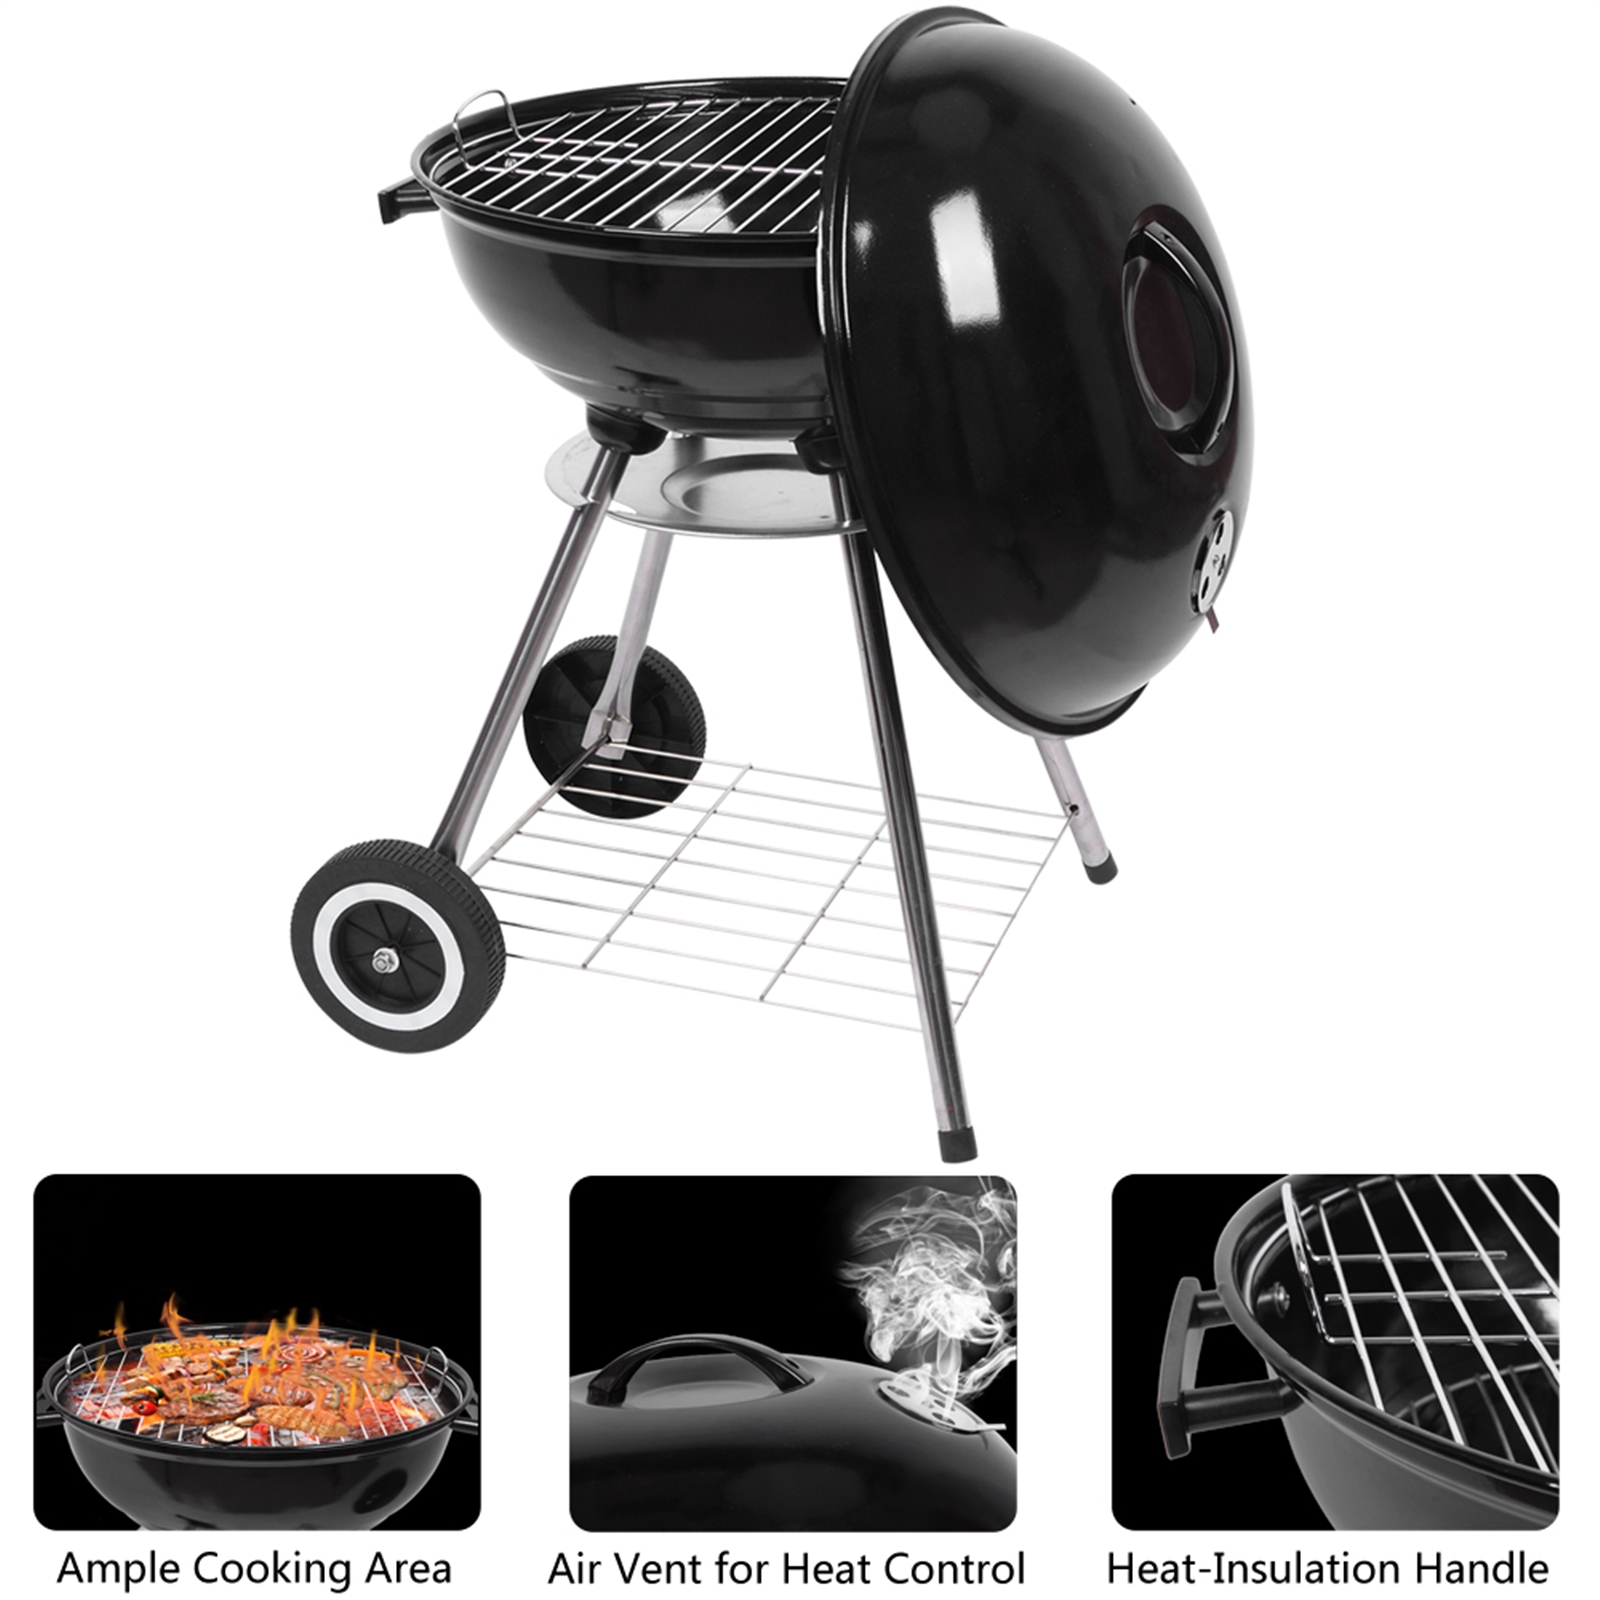 Goorabbit BBQ Smoker,Small Charcoal Grill, Charcoal BBQ Grill Charcoal with 2 Wheels, Outdoor BBQ Grill Charcoal with Ventilation & Metal Griddle, 18" Dia x 23.6" H Grill Outdoor Cooking,Black - image 5 of 14